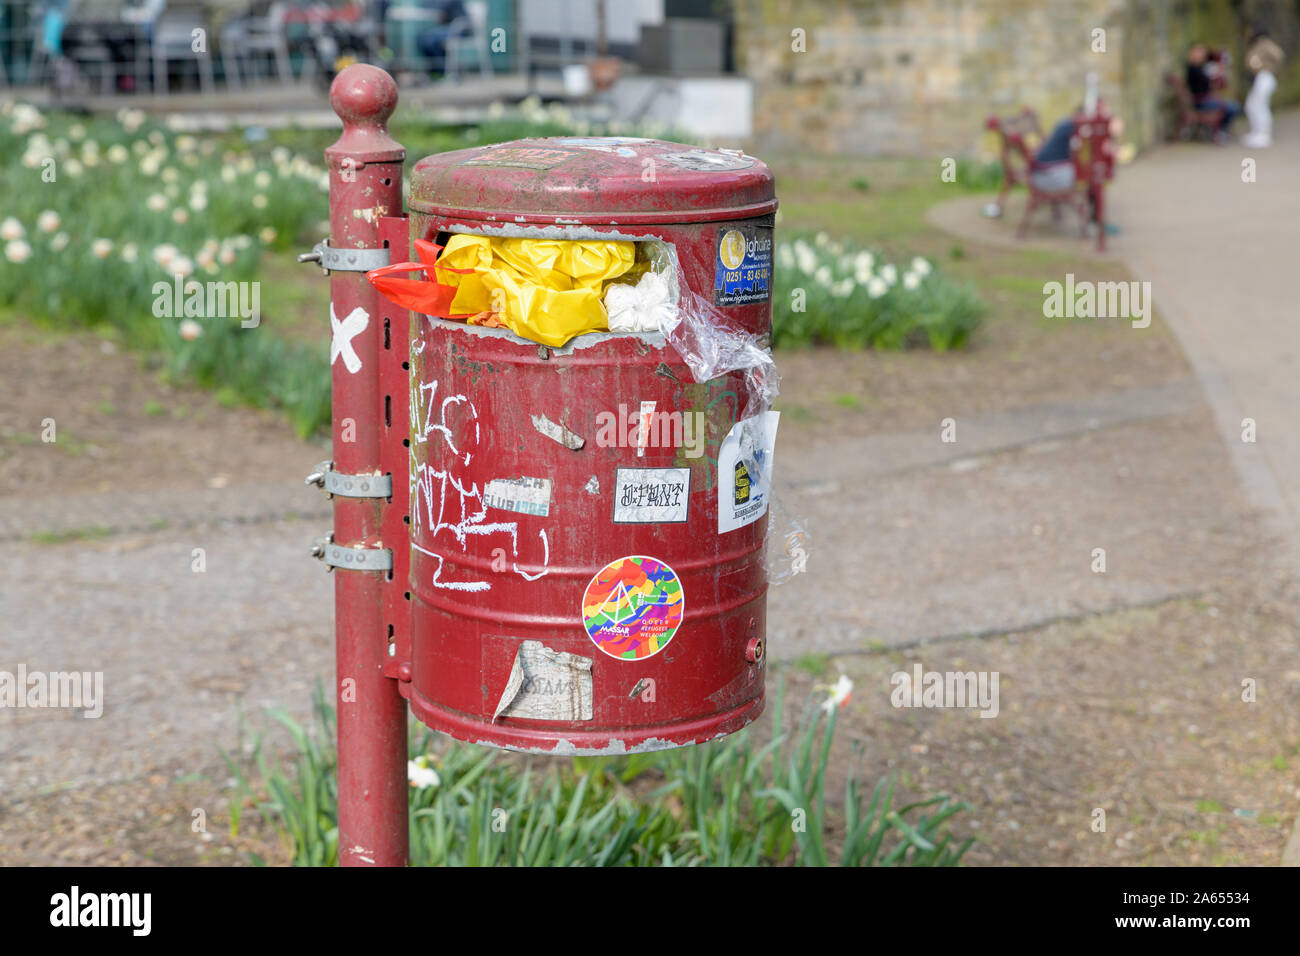 MUENSTER, GERMANY - MARCH 30, 2019: A garbage bin full of waste and covered with stickers and messages stands in a park in Muenster, Germany on March Stock Photo